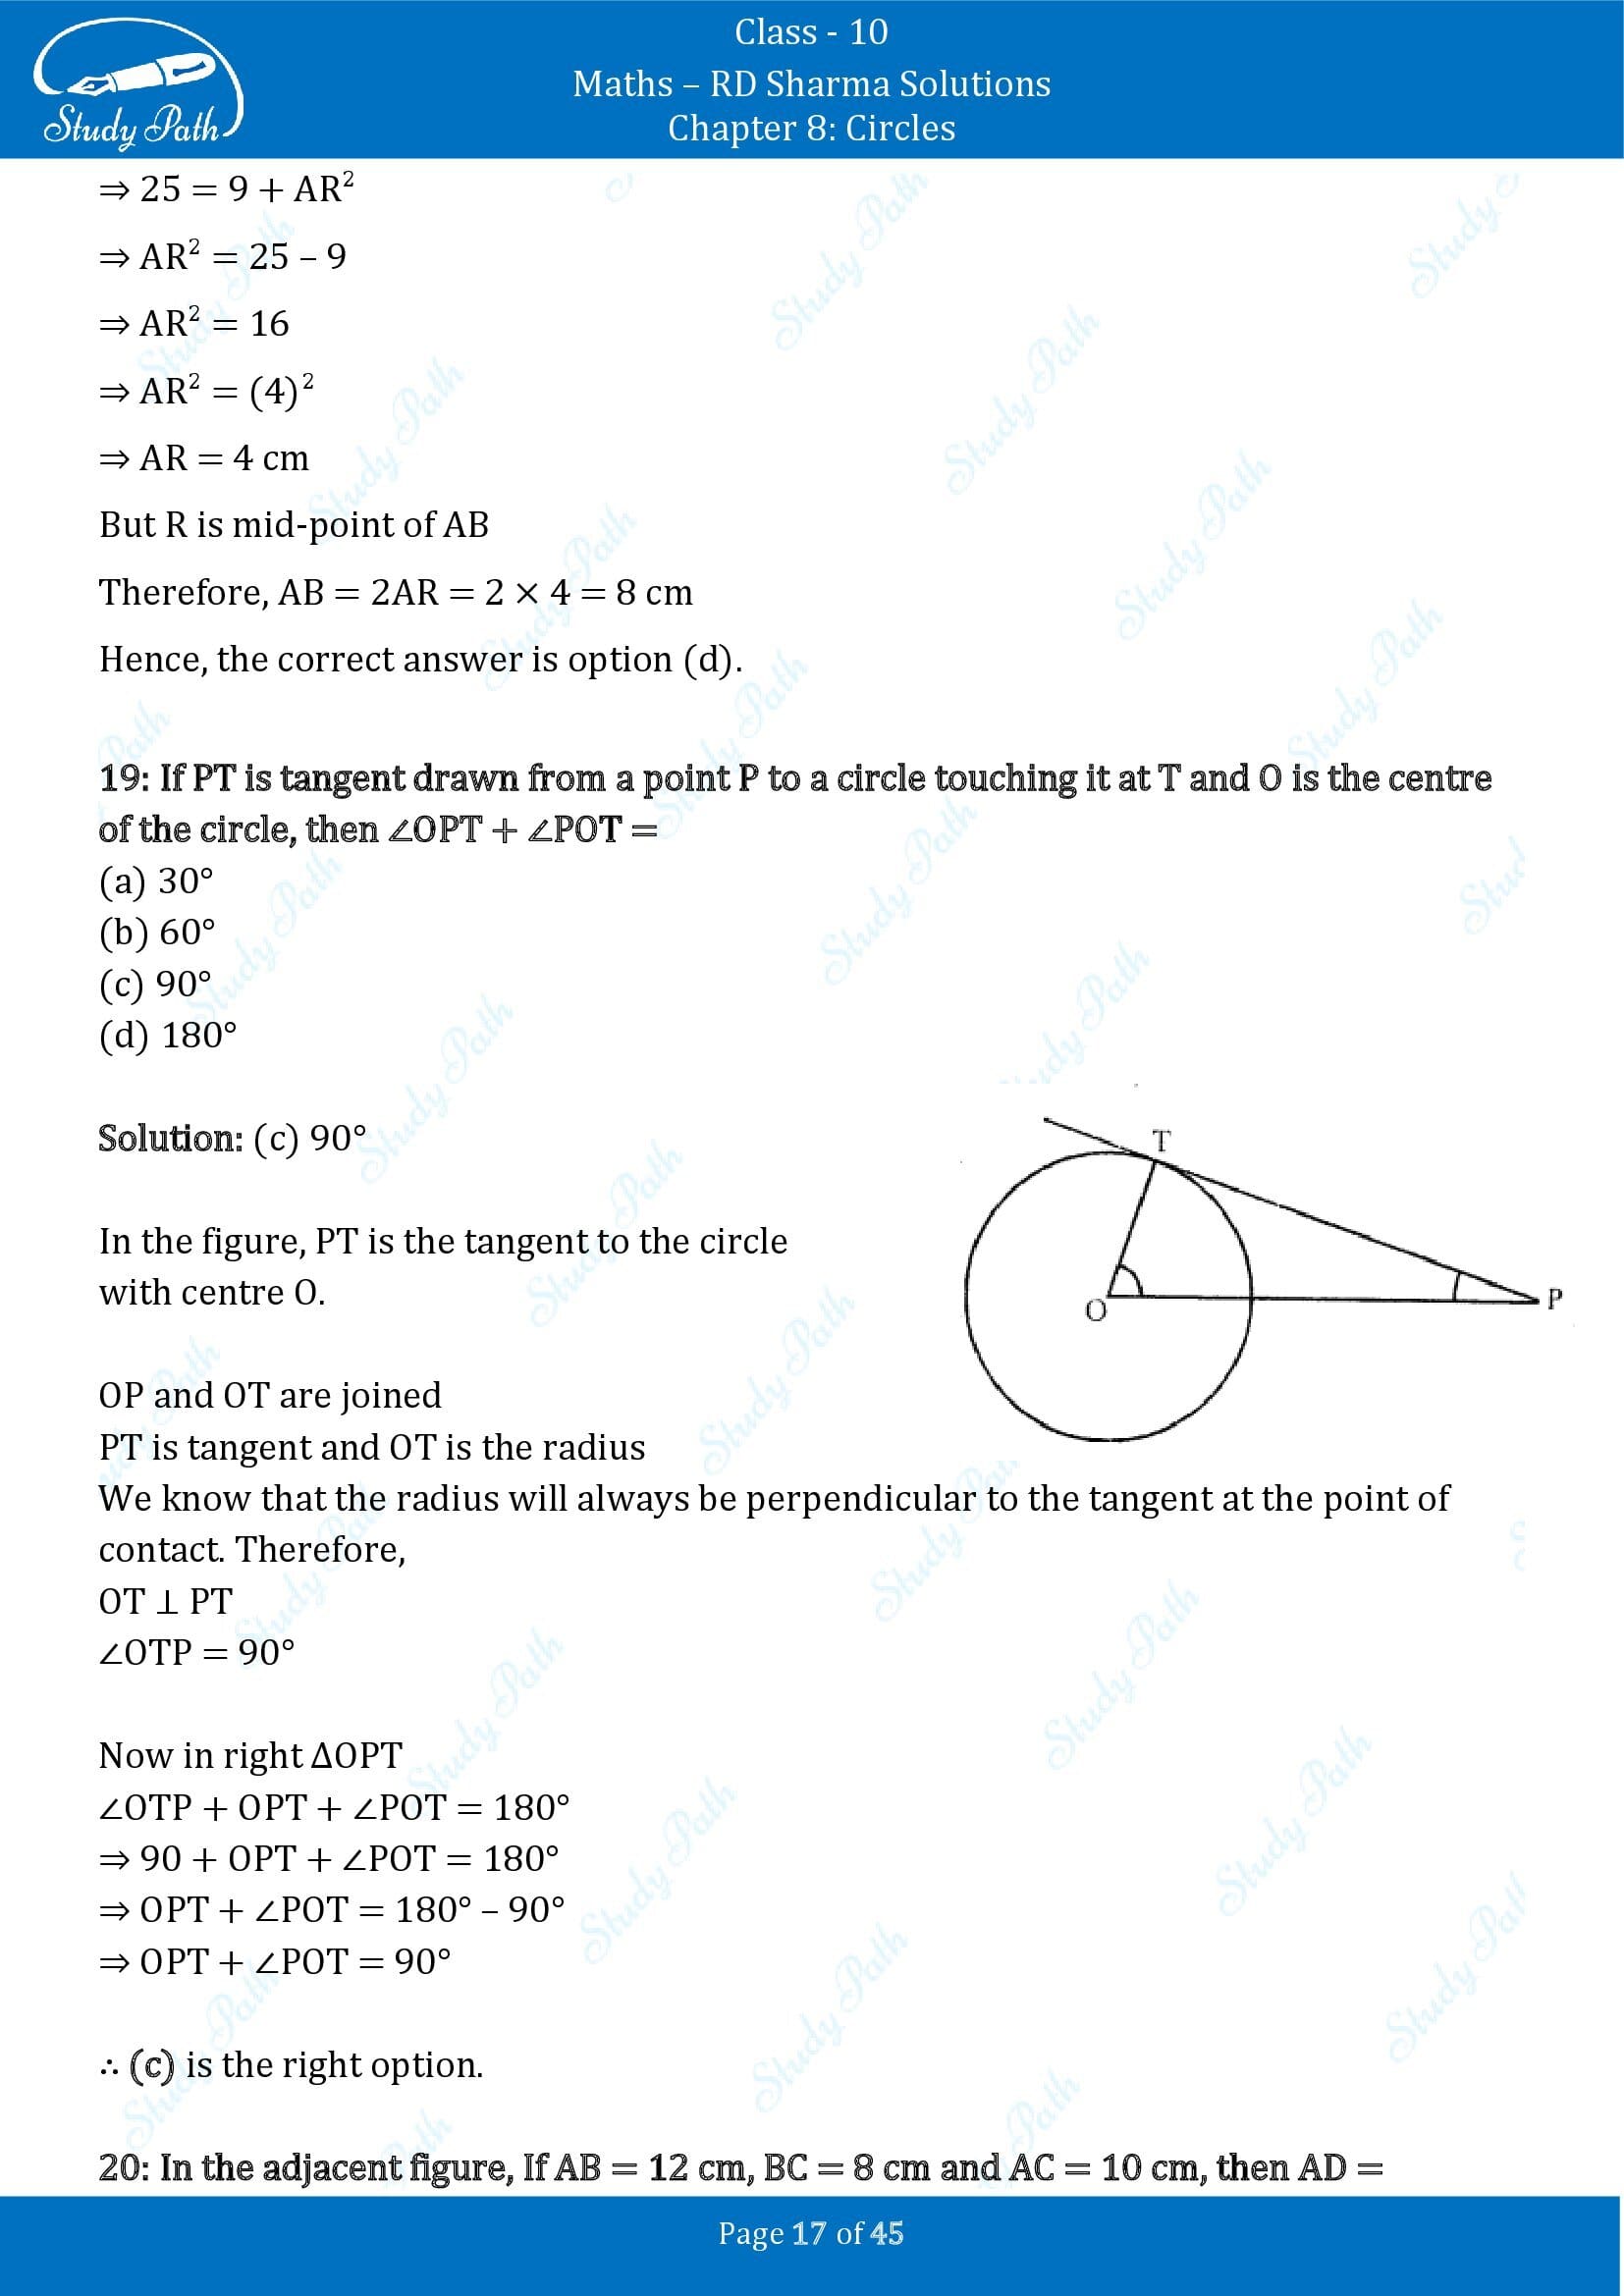 RD Sharma Solutions Class 10 Chapter 8 Circles Multiple Choice Questions MCQs 00017